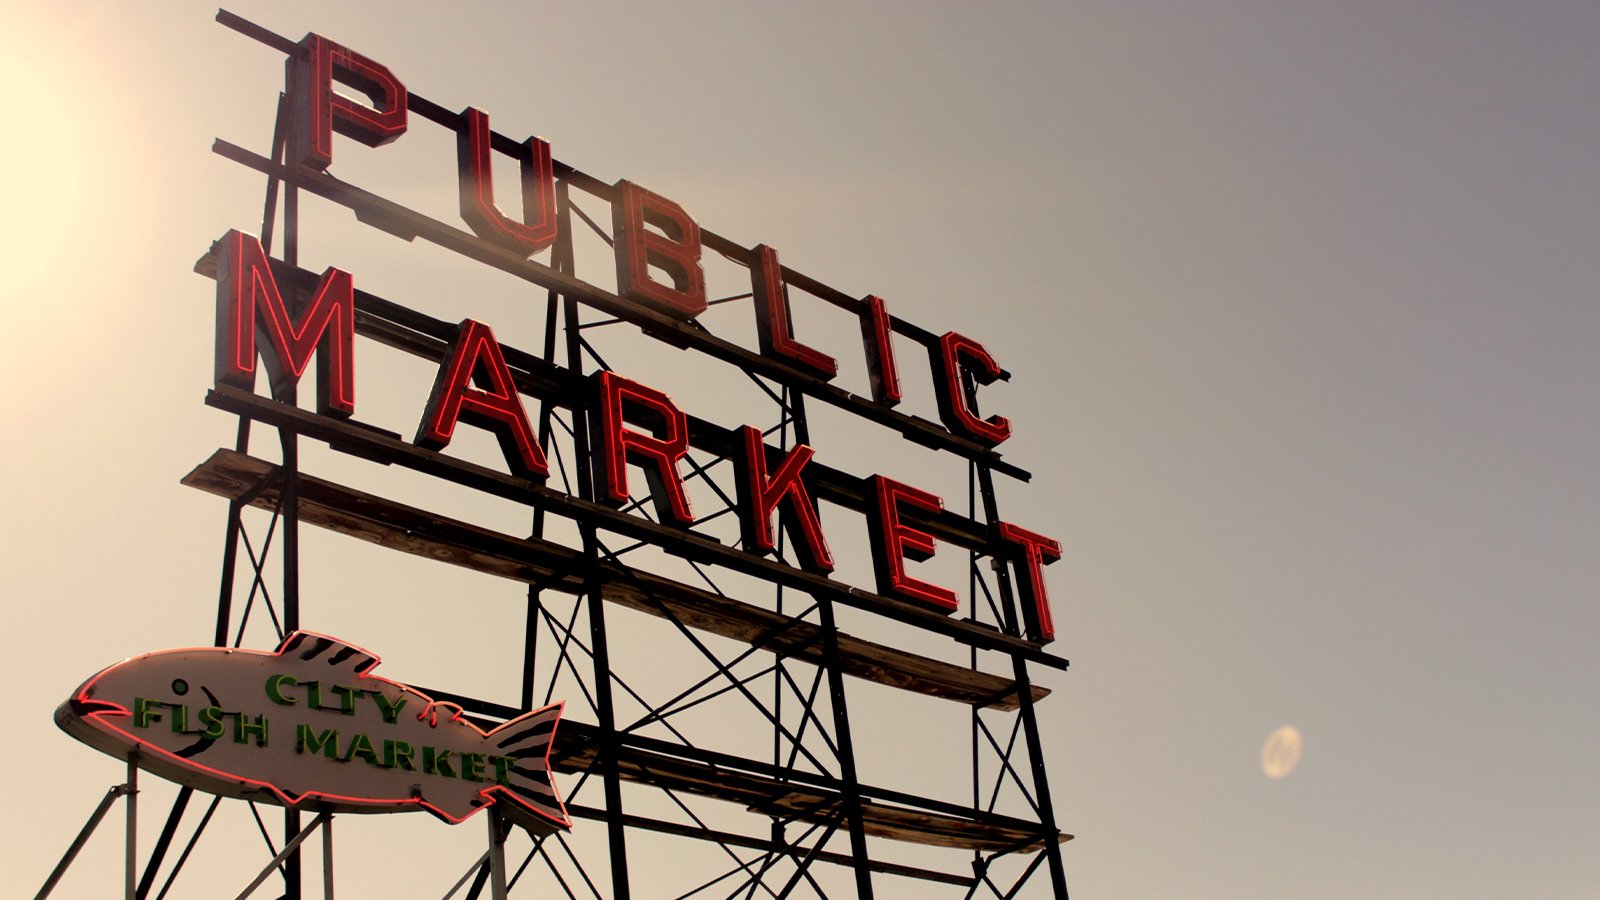 An image of the famous PUBLIC MARKET sign in Seattle.